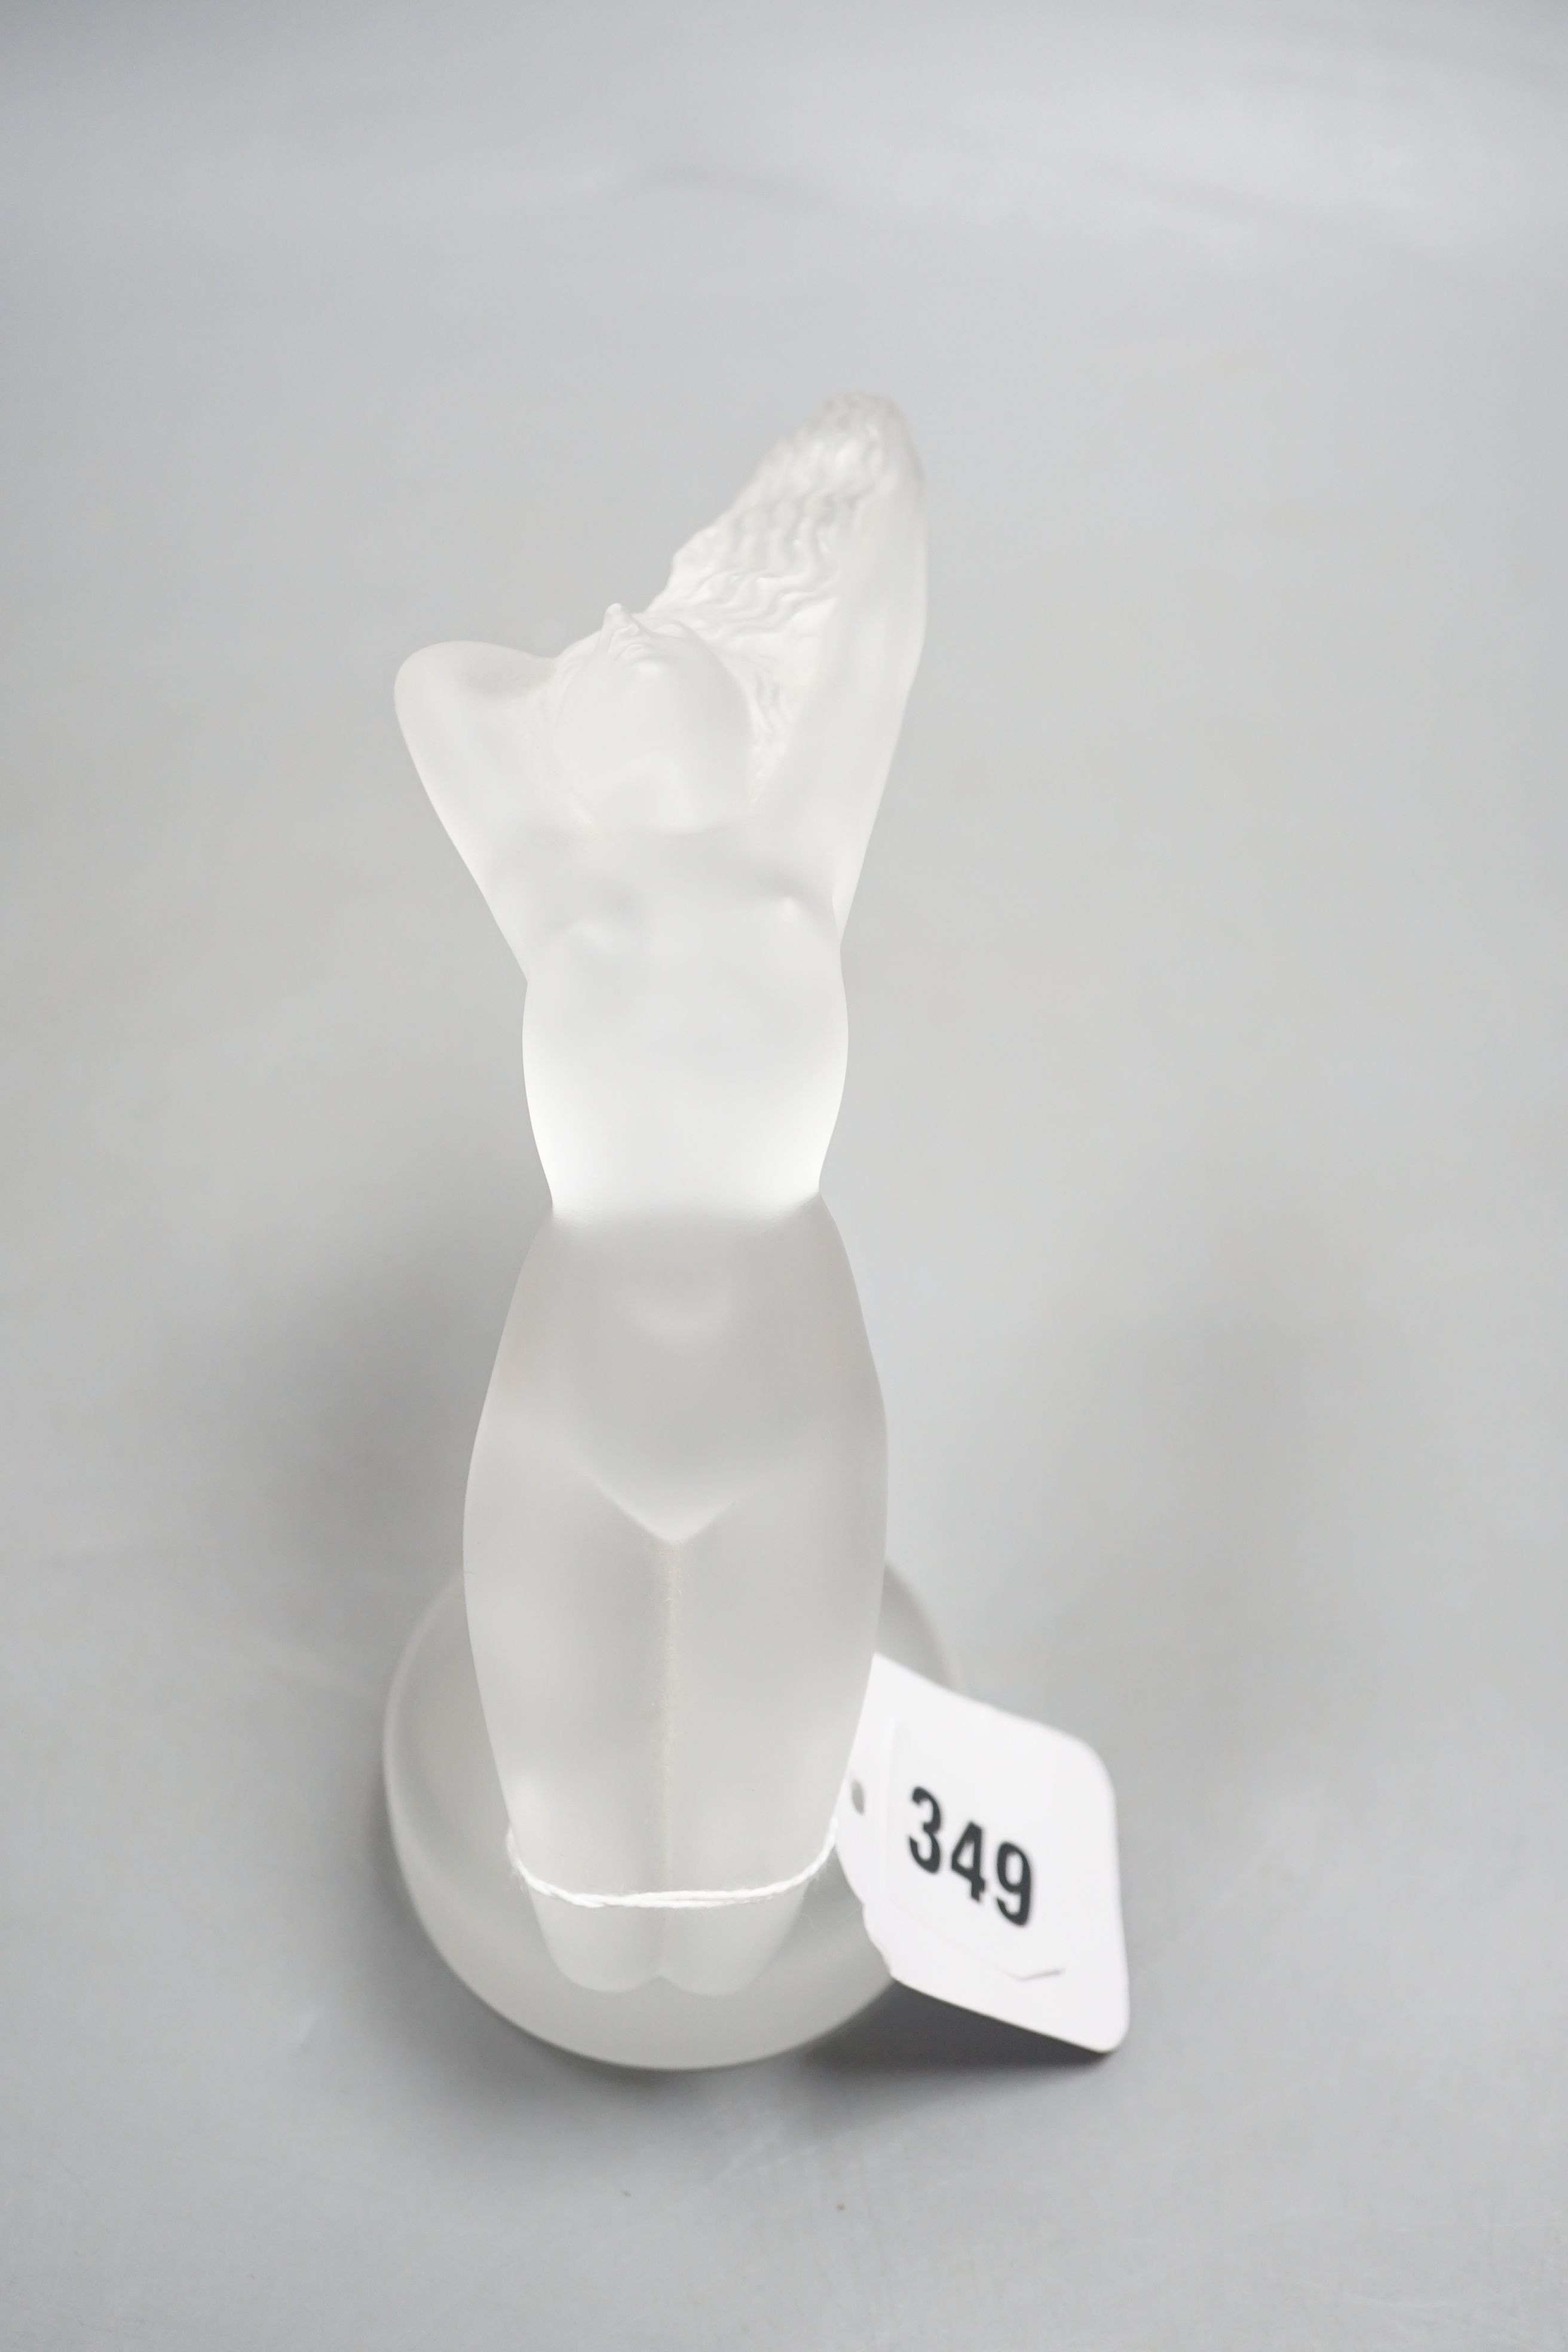 A Lalique frosted glass car mascot reclining nude, 'Chrysis' - 14cm tall